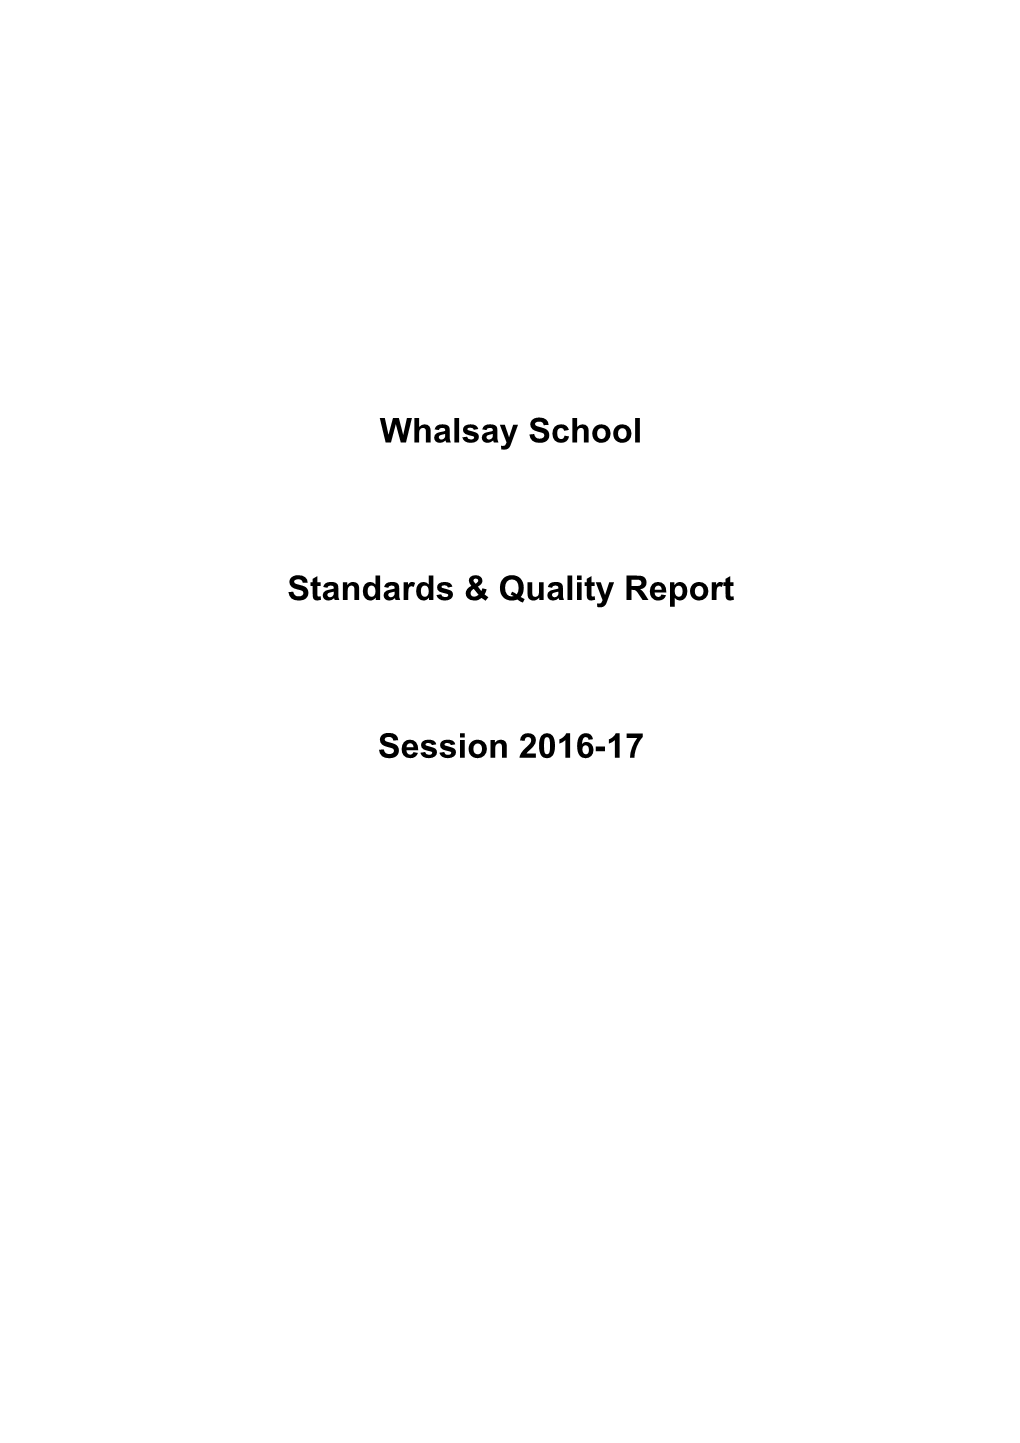 Standards & Quality Report